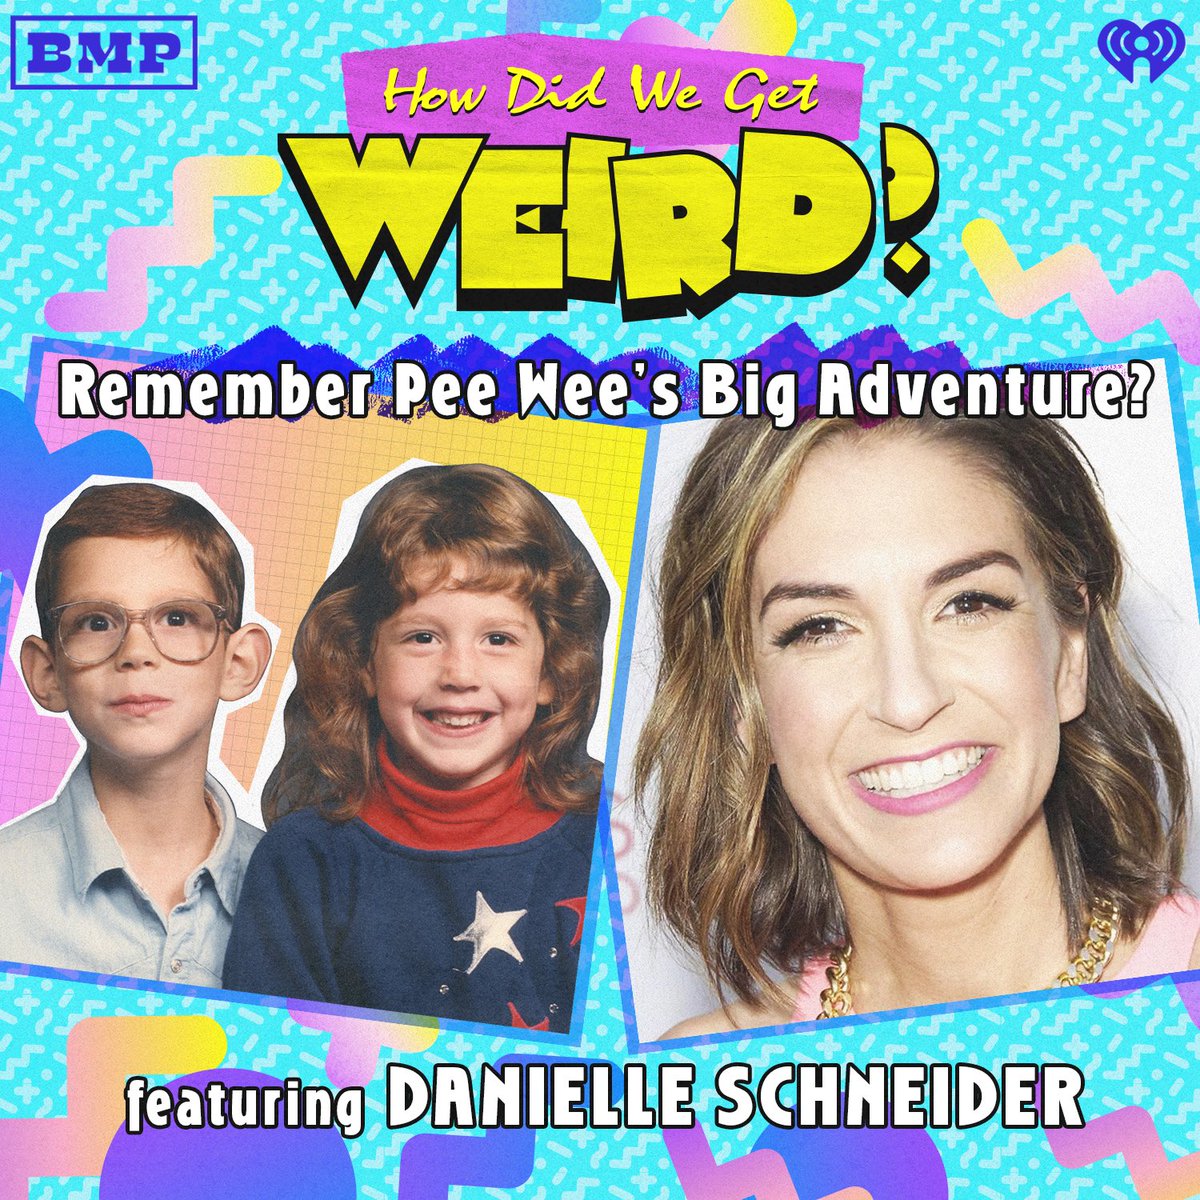 On today’s new episode, @jonahmbayer and I are thrilled to welcome our hilarious friend @Daniellestuff !! We’re talking about Pee Wee’s Big Adventure and other movies that influenced us! Plus how rejection, lots of it from a young age, got us to where we are today! Check it out!